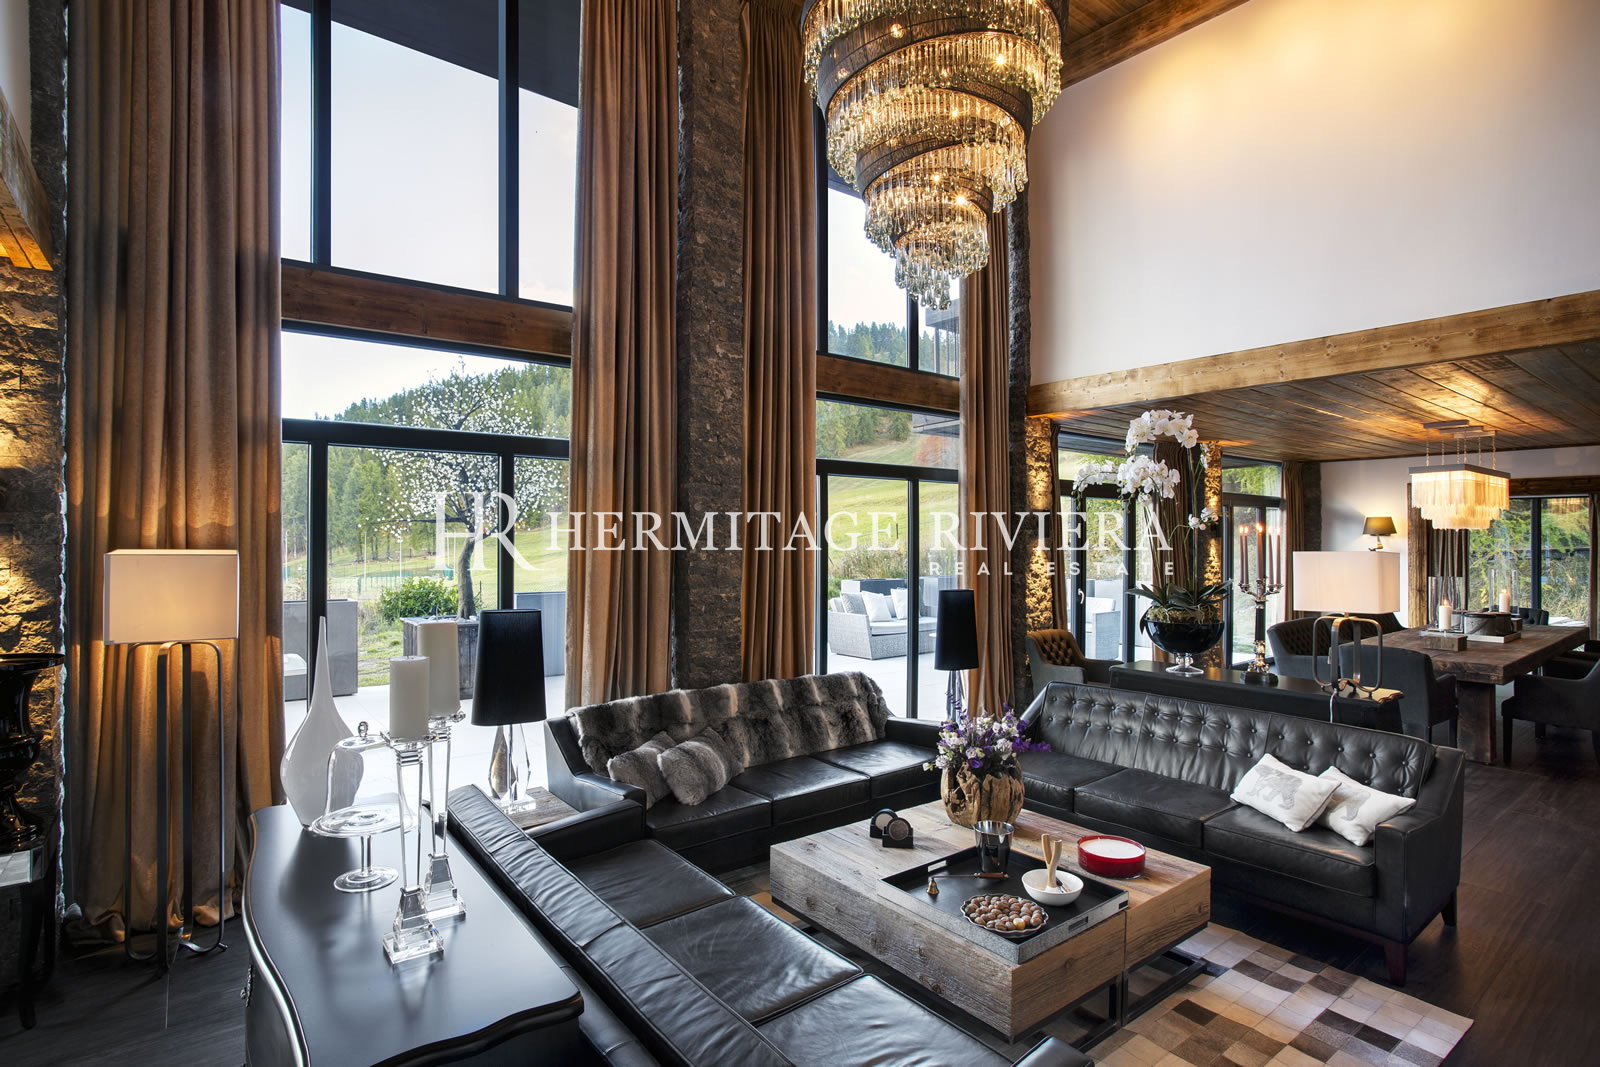 Luxury boutique hotel by the slopes (image 10)